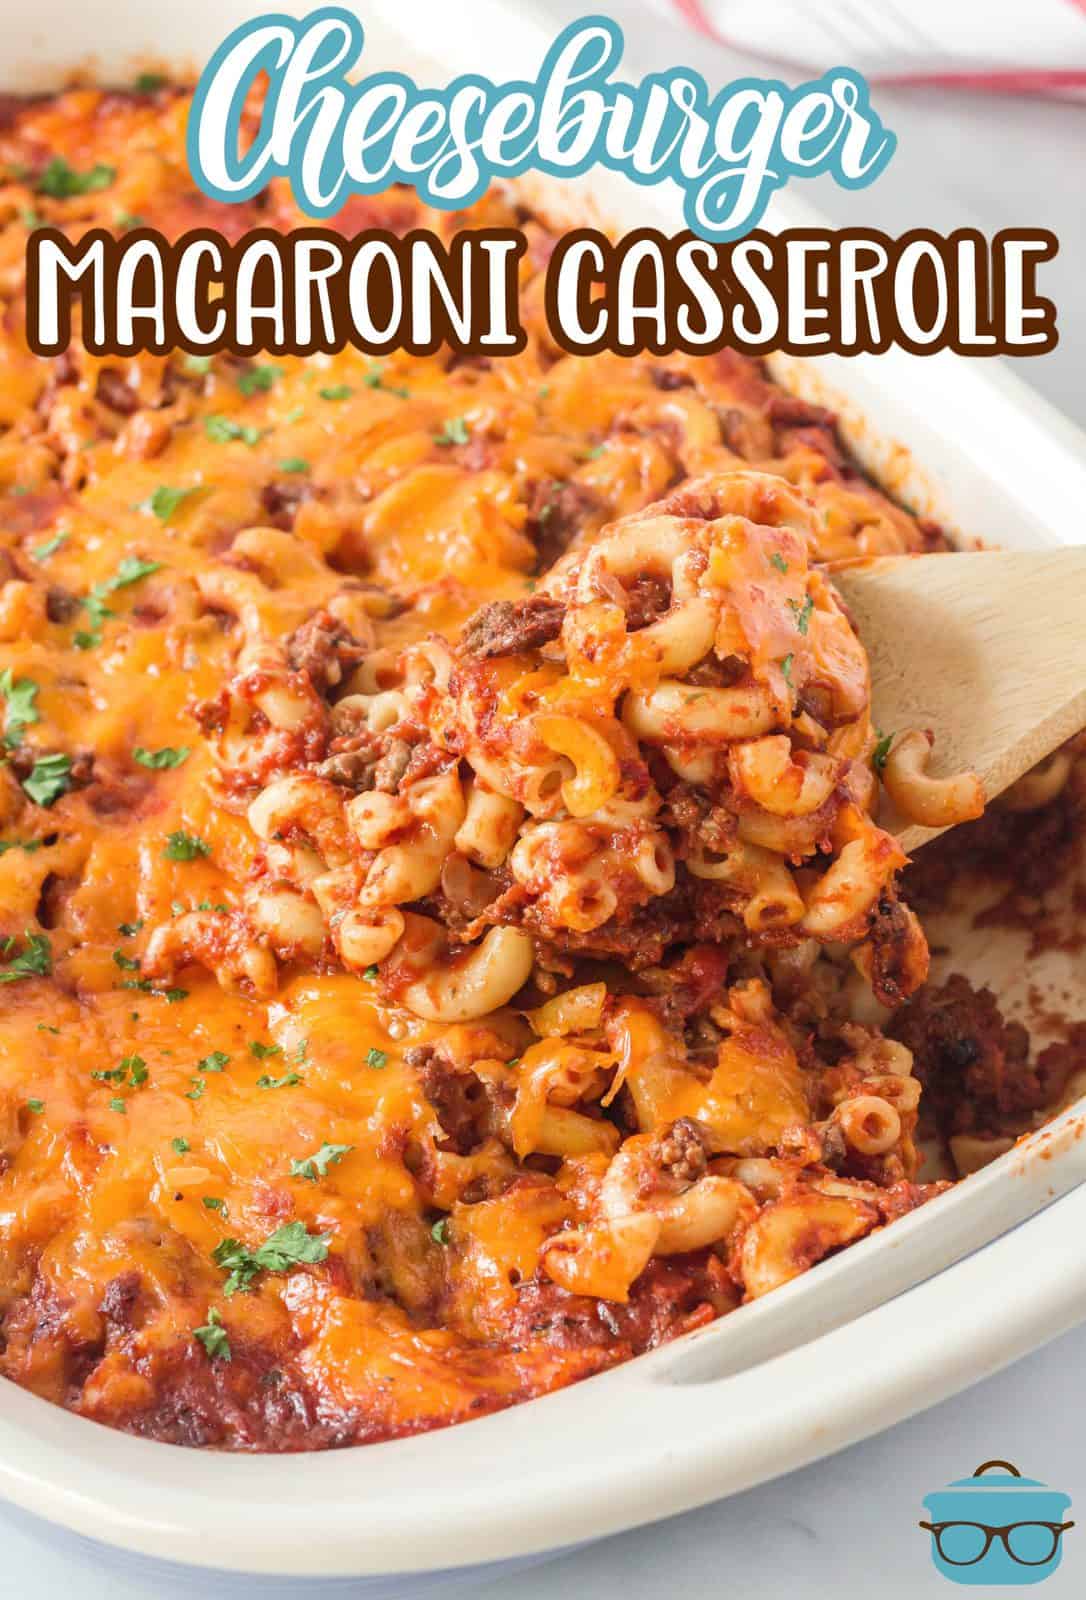 Pinterest image of serving spoon scooping out some of the Cheeseburger Macaroni Casserole.